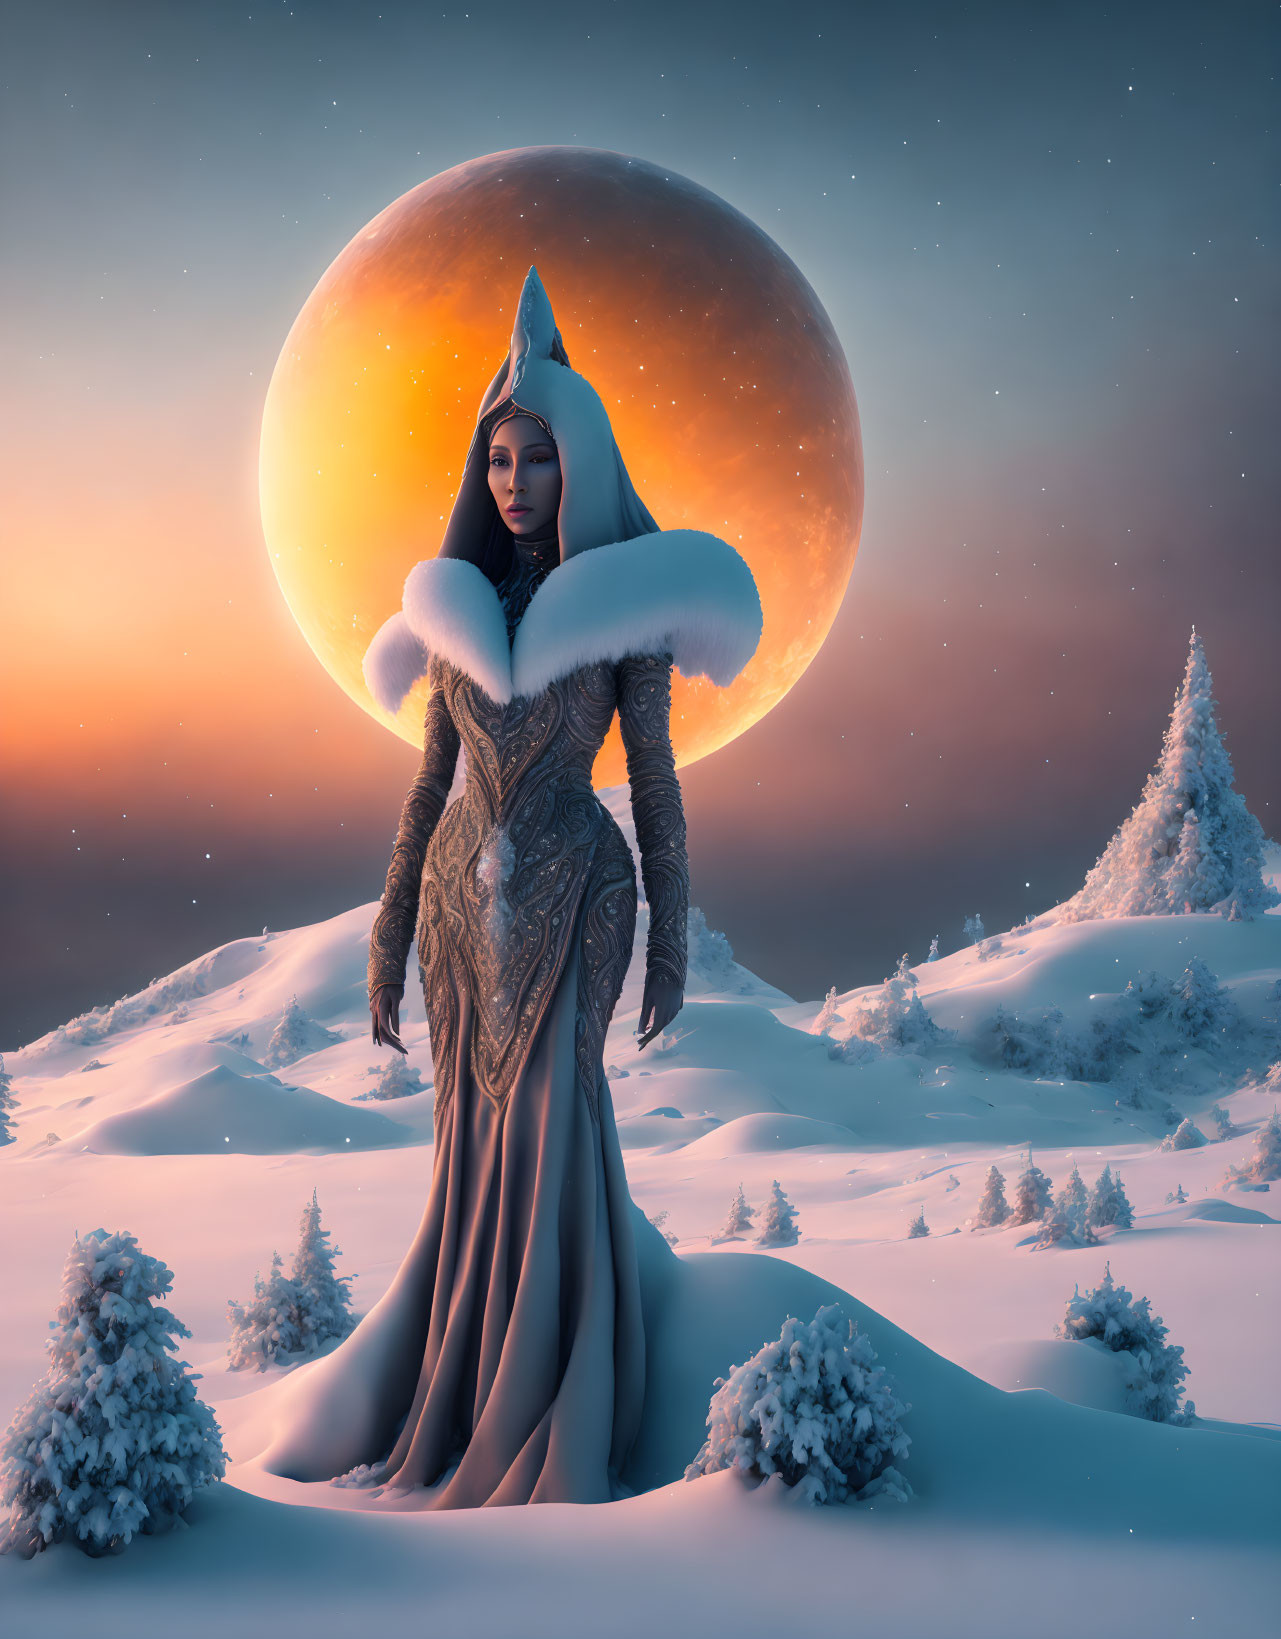 Mother Earth:2 - Winter time in an alien world